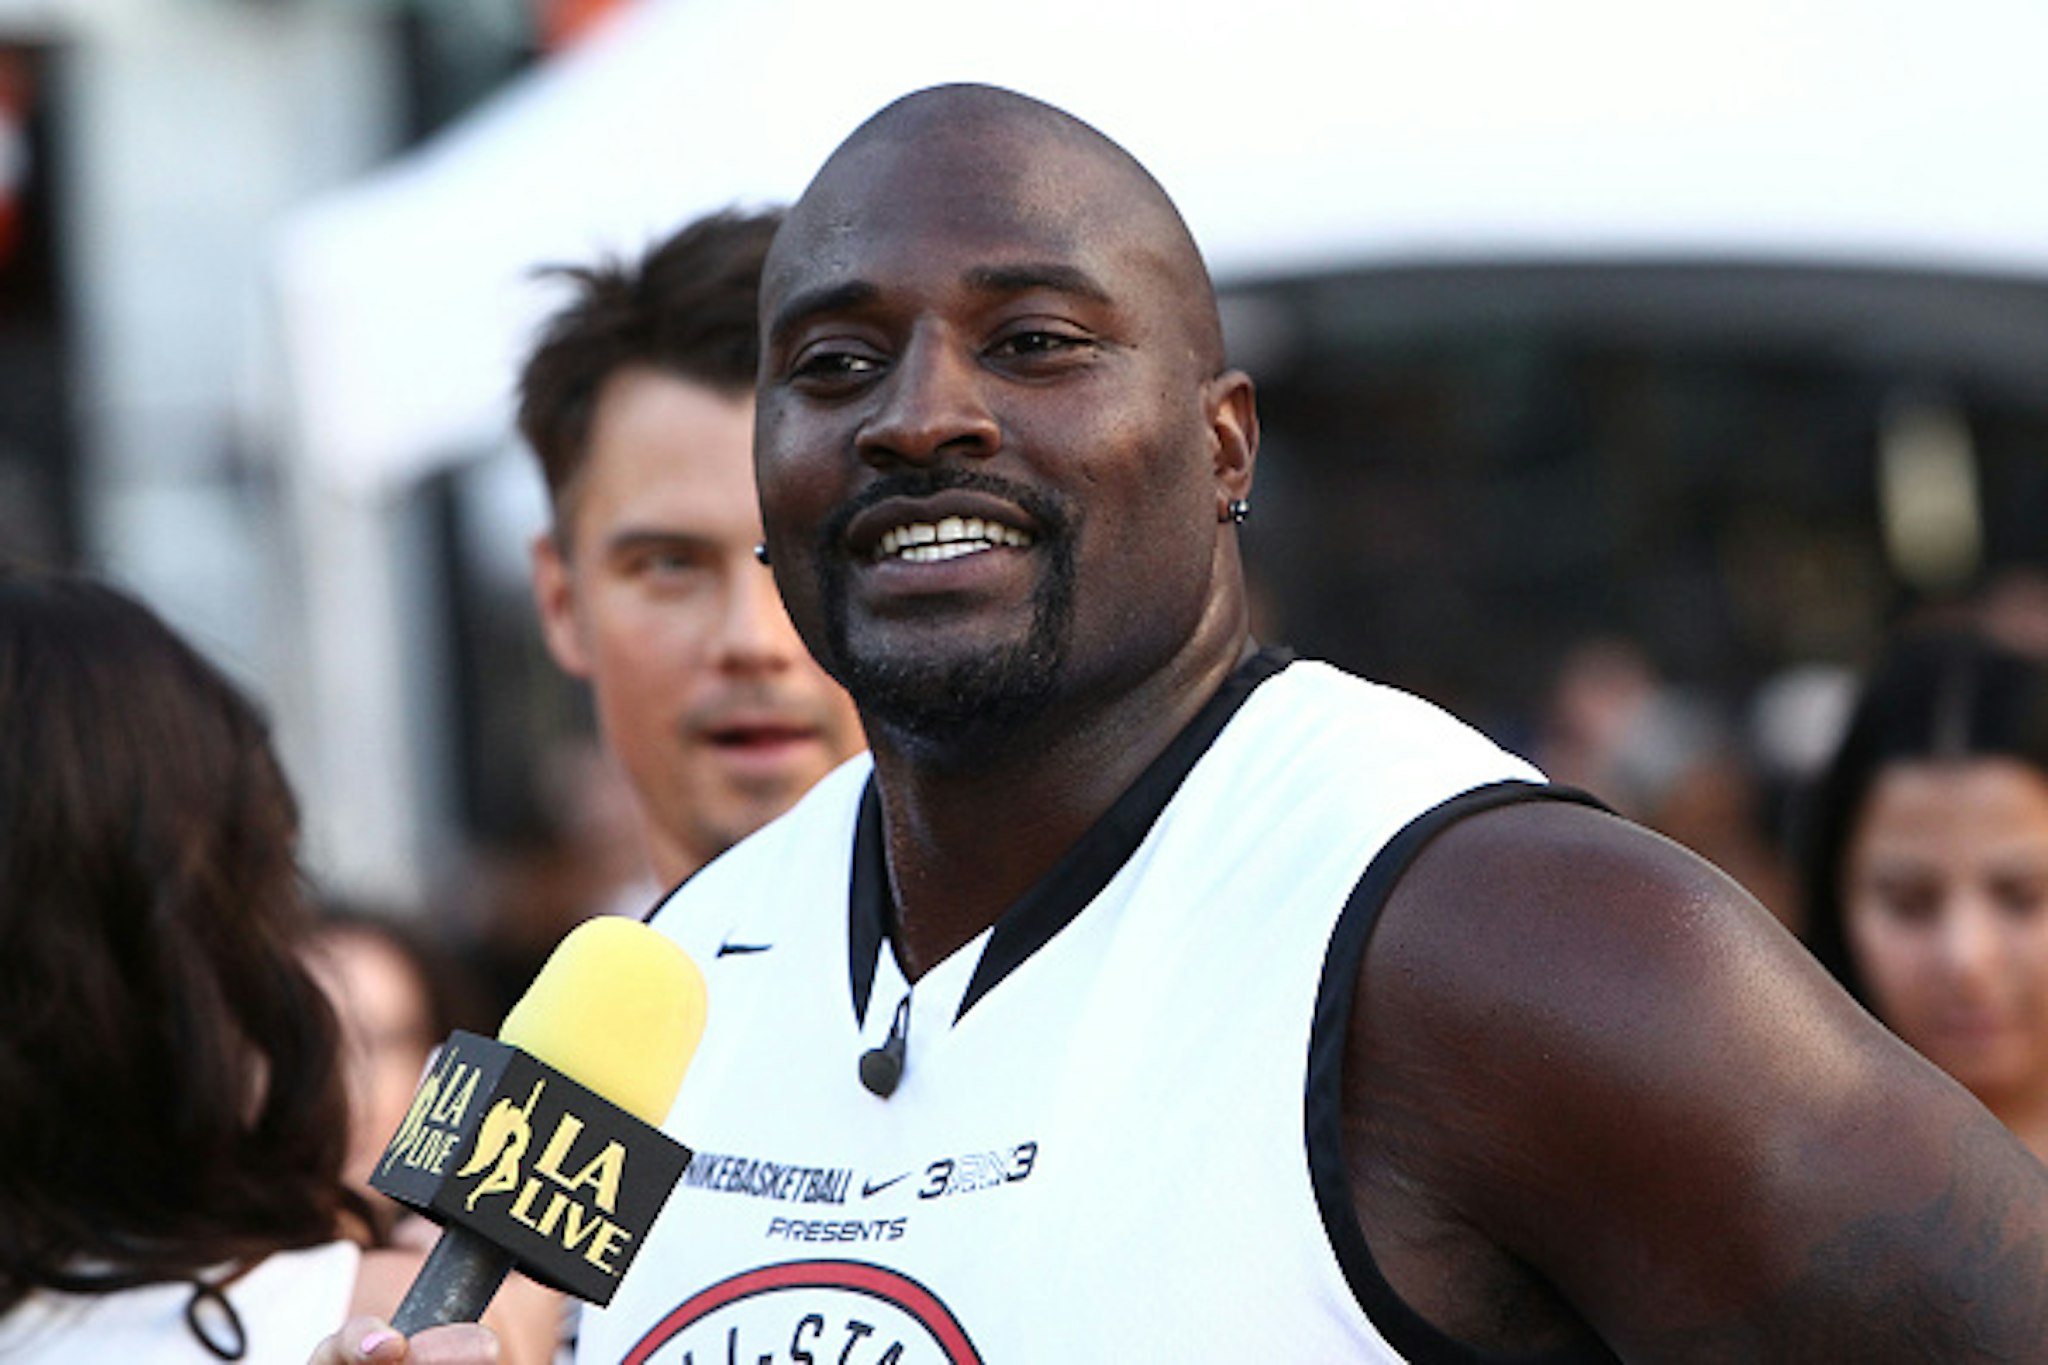 LOS ANGELES, CA - AUGUST 07: Ex NFL player Marcellus Wiley attends the ESPNLA All Star Celebrity Basketball Game Kick Off to the 2015 Nike Basketball 3ON3 Tournament Presented By NBC4 Southern California at L.A. LIVE on August 7, 2015 in Los Angeles, California.